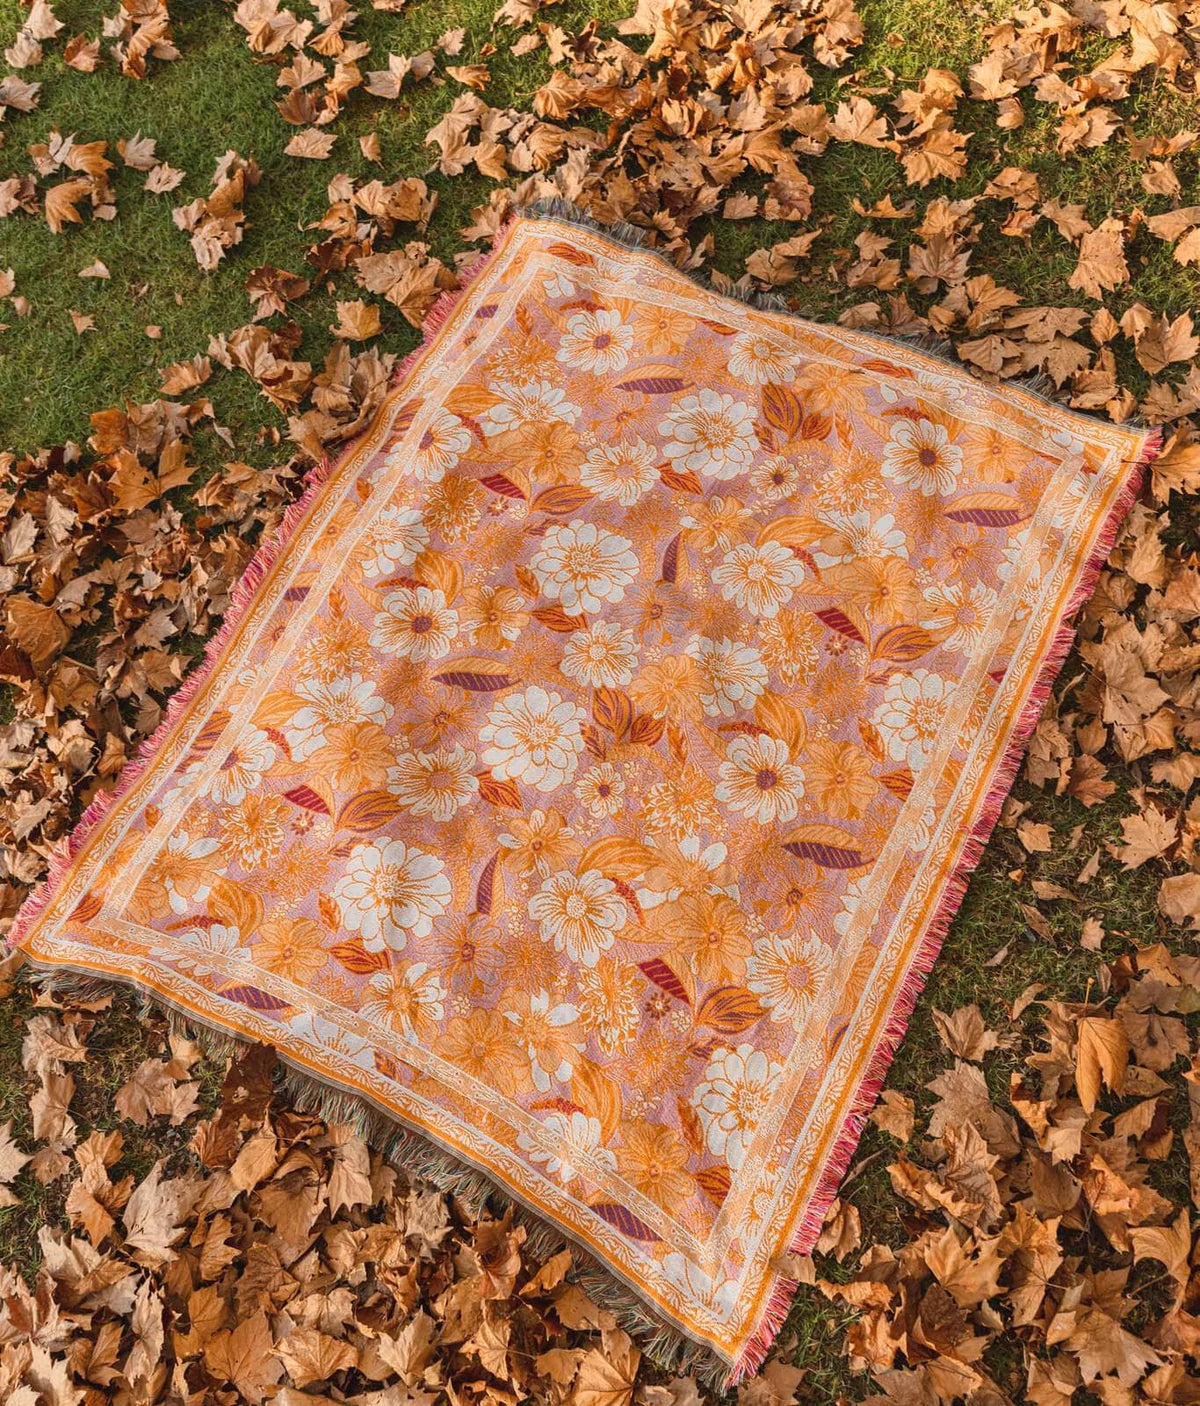 Layla Picnic Rug by Wilder the Label